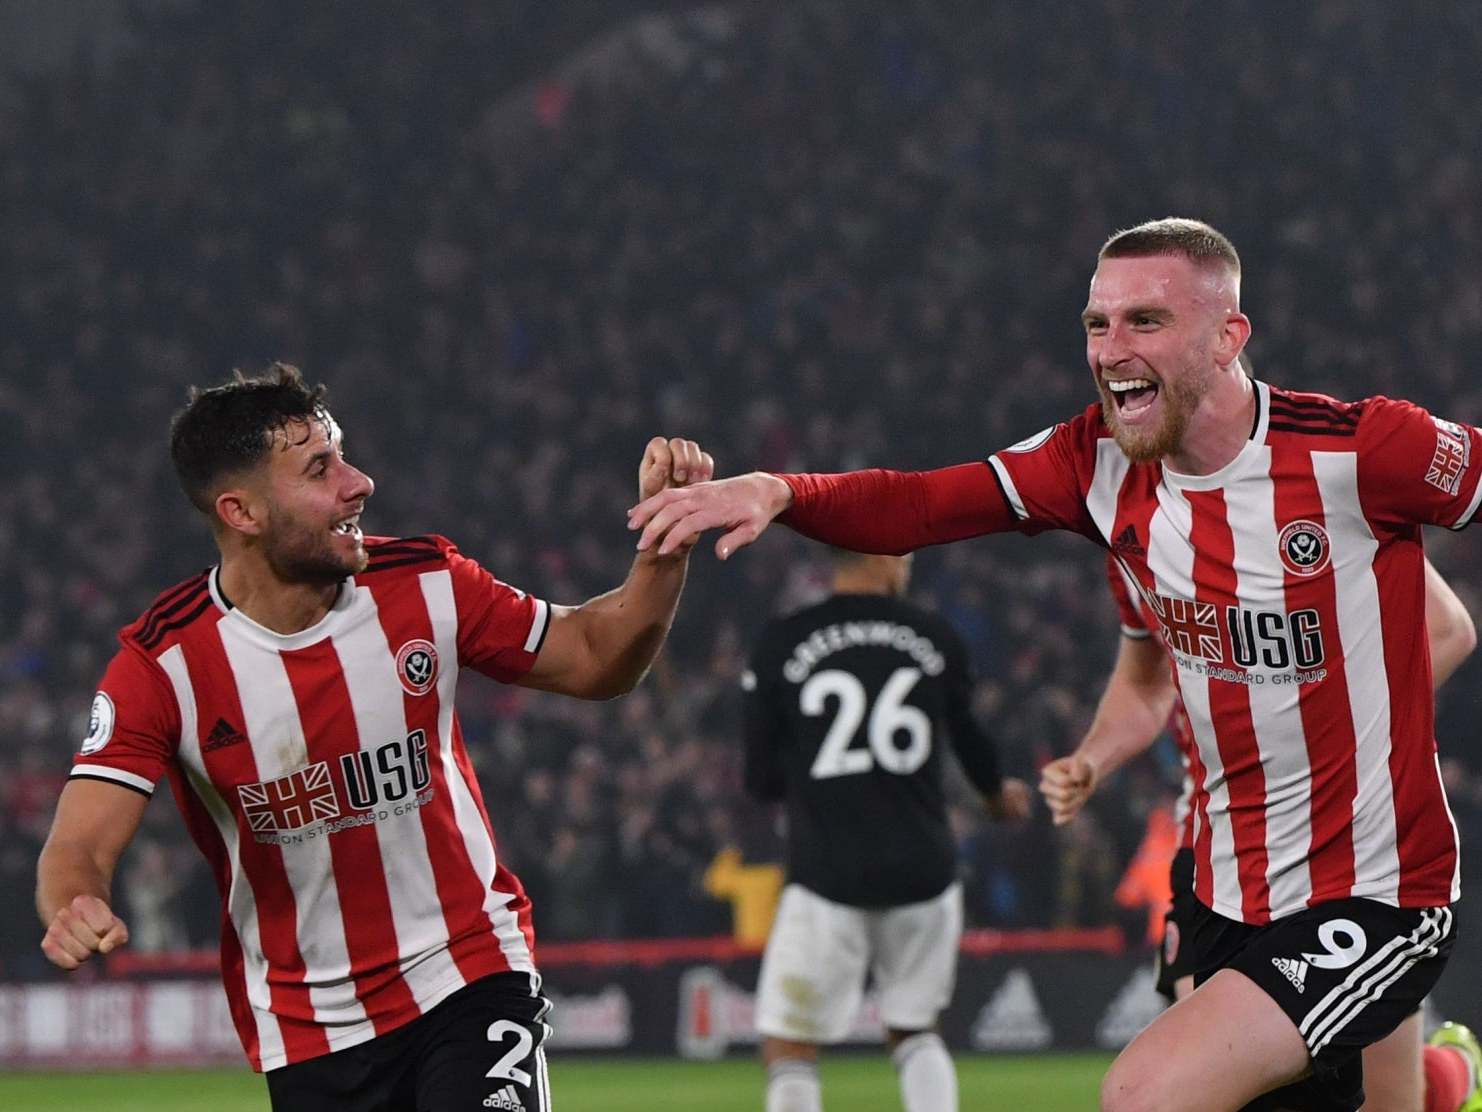 Sheffield United vs Manchester United: Oli McBurnie denies Red Devils with late equaliser - Five things we learned